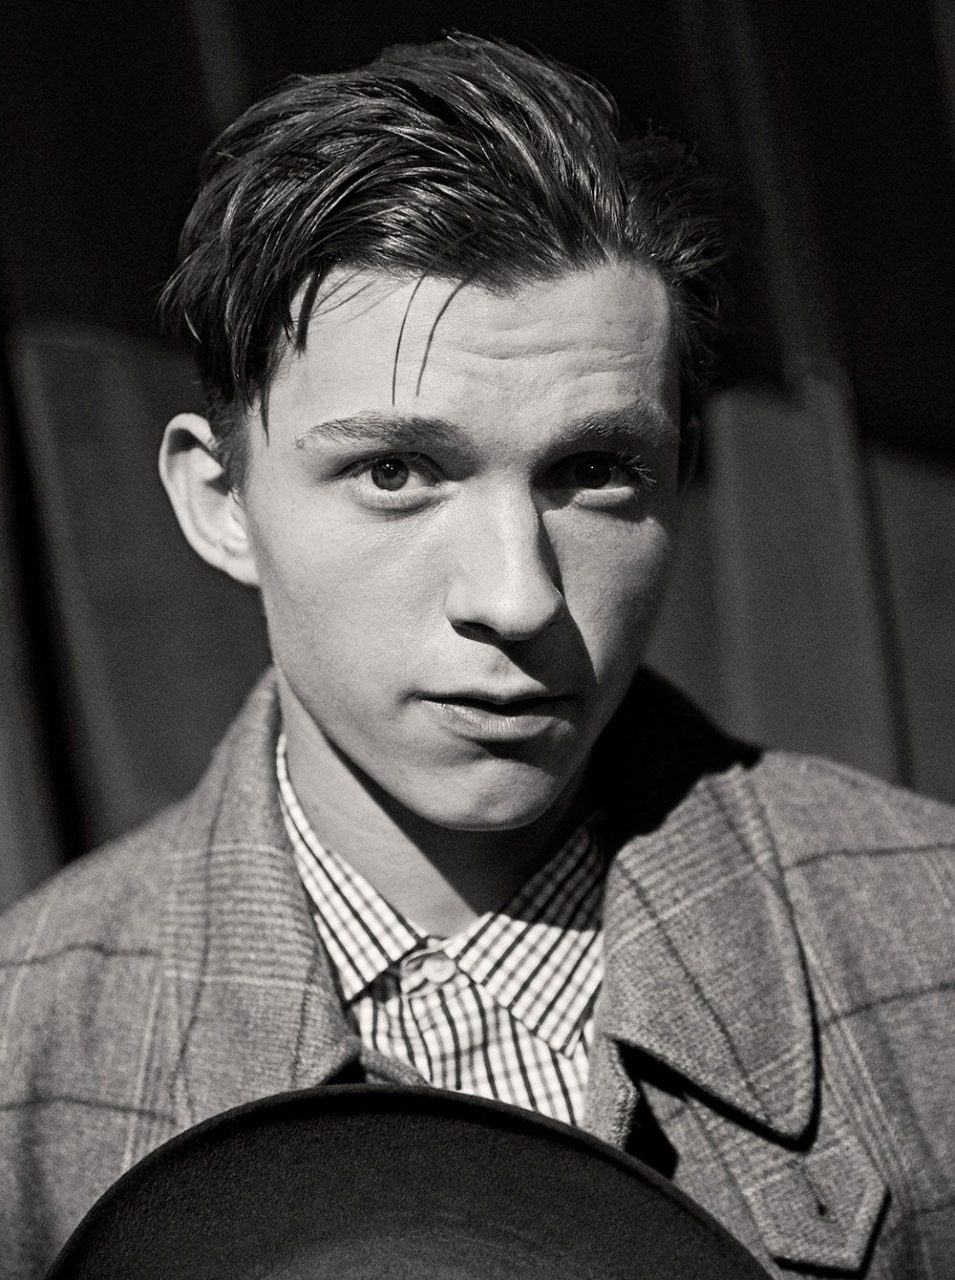 Young Tom Holland Hairstyle Image